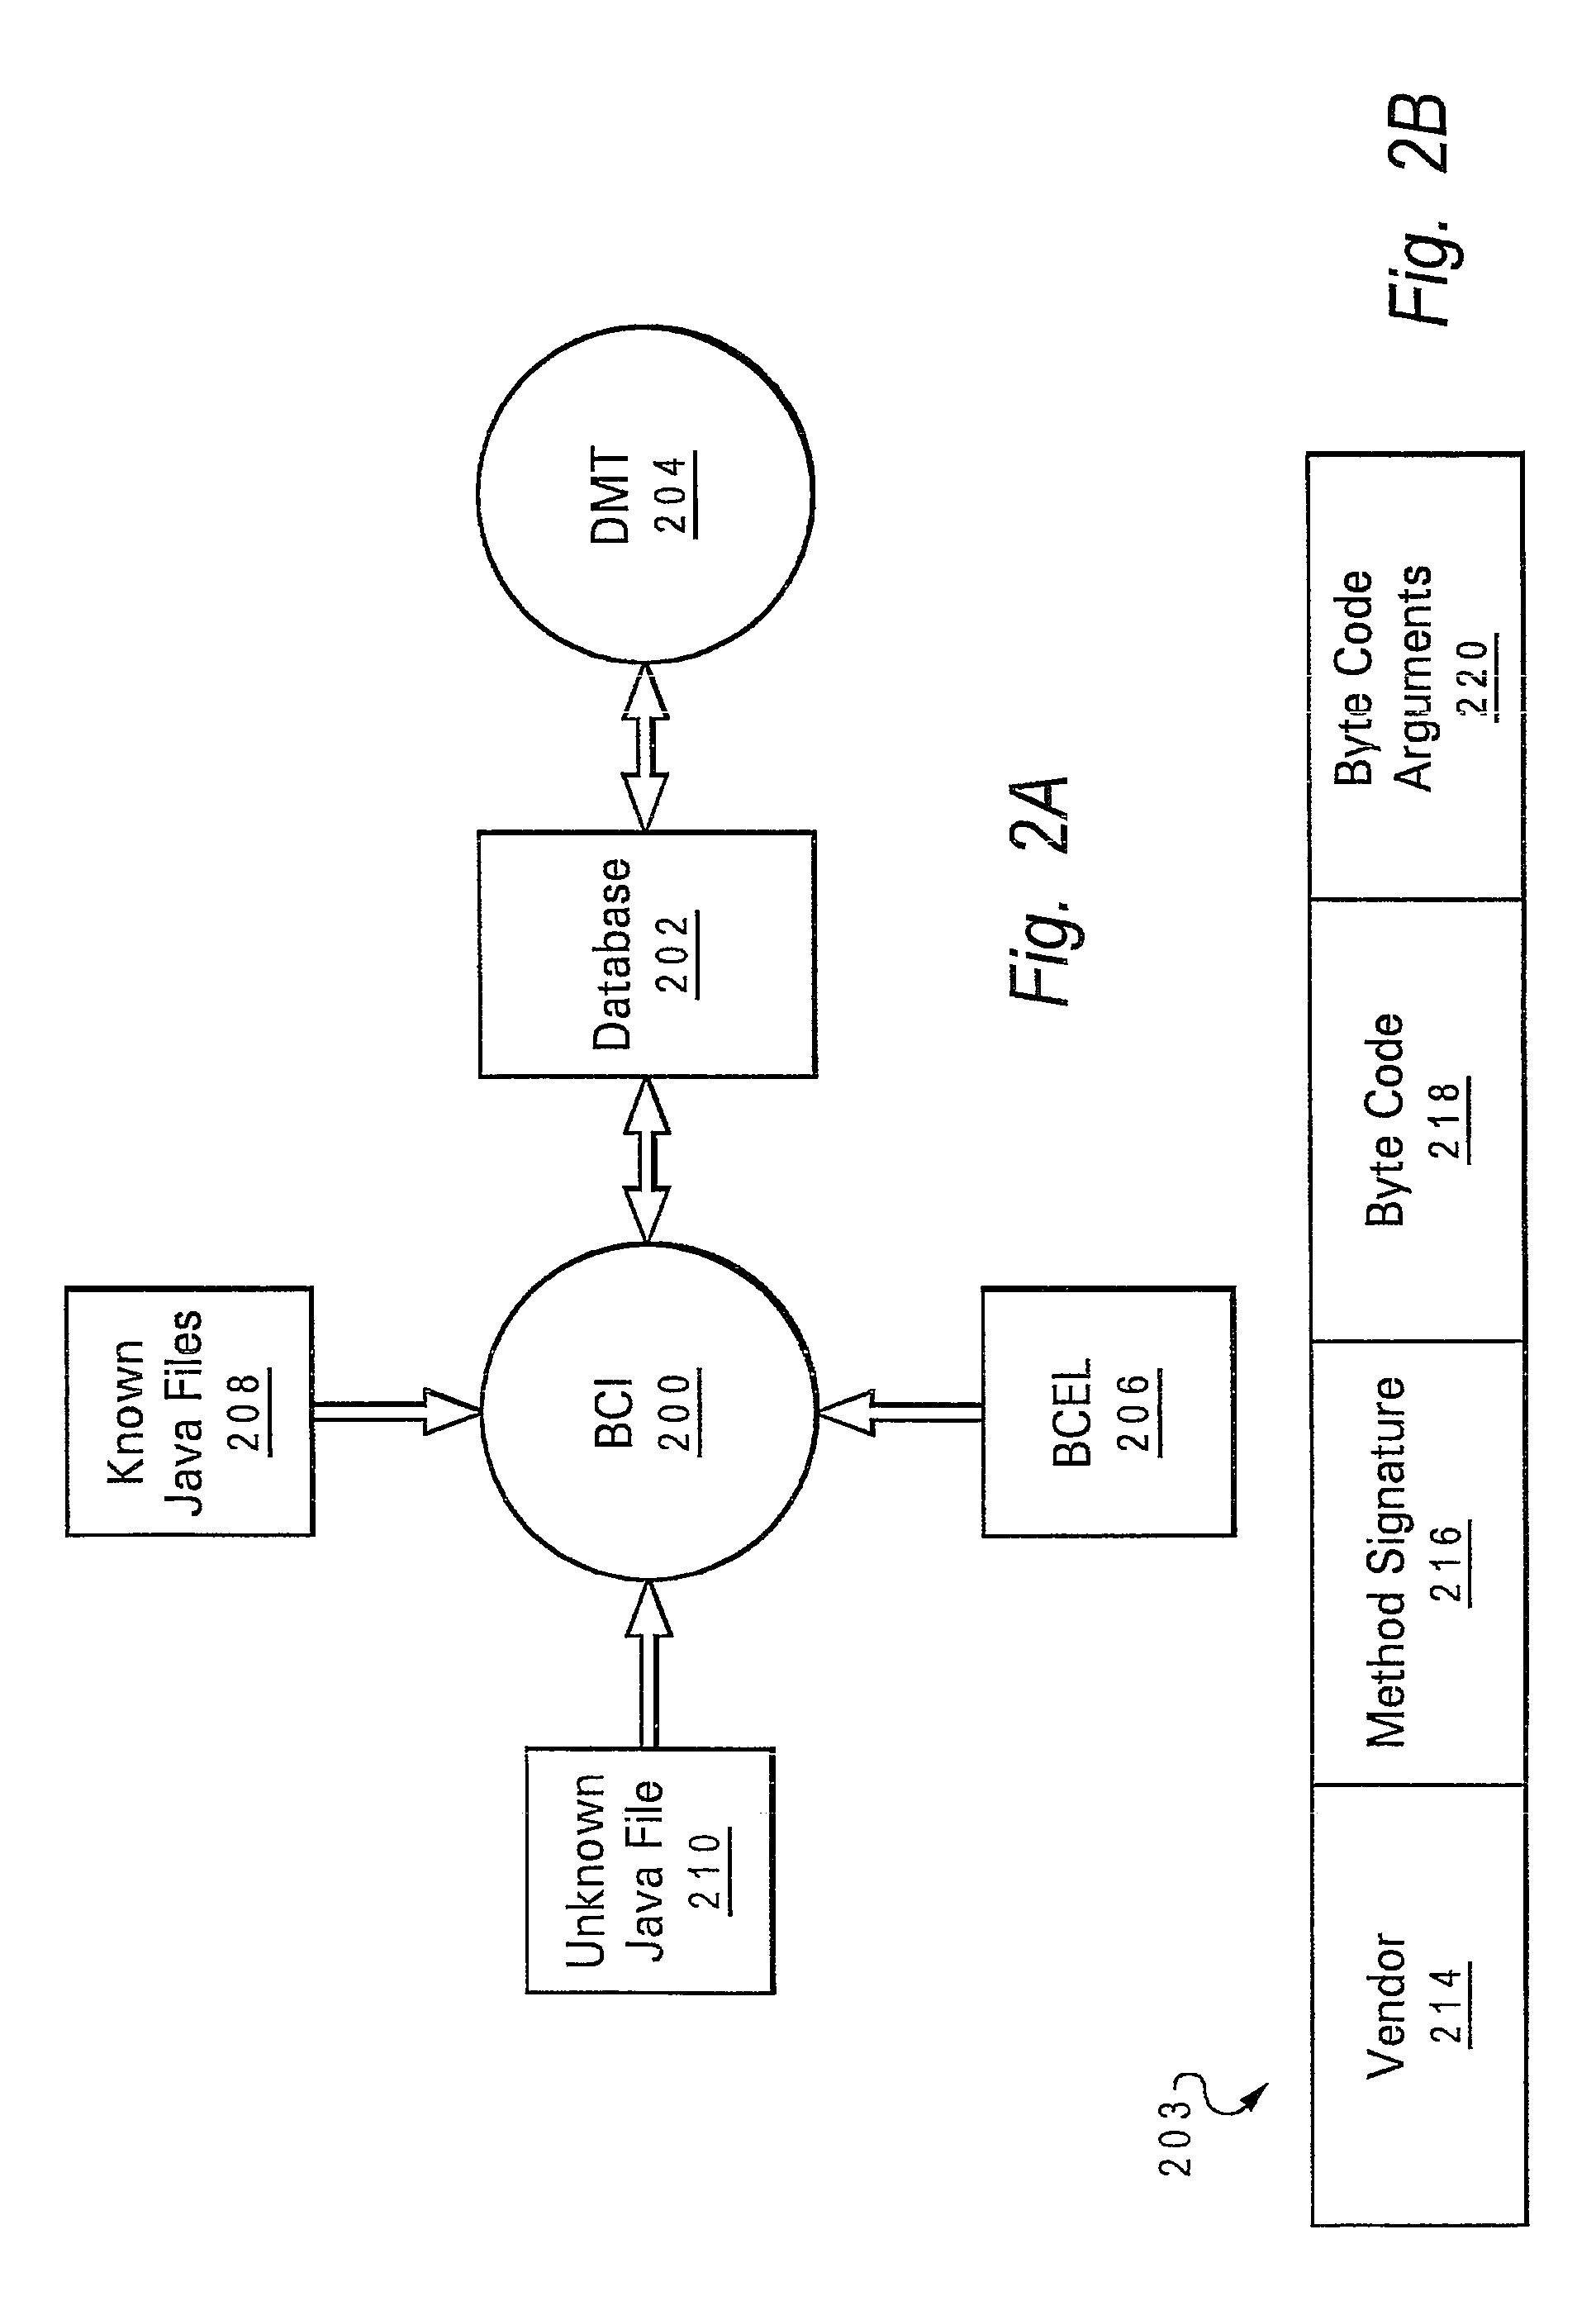 Method, system and program product for determining java software code plagiarism and infringement